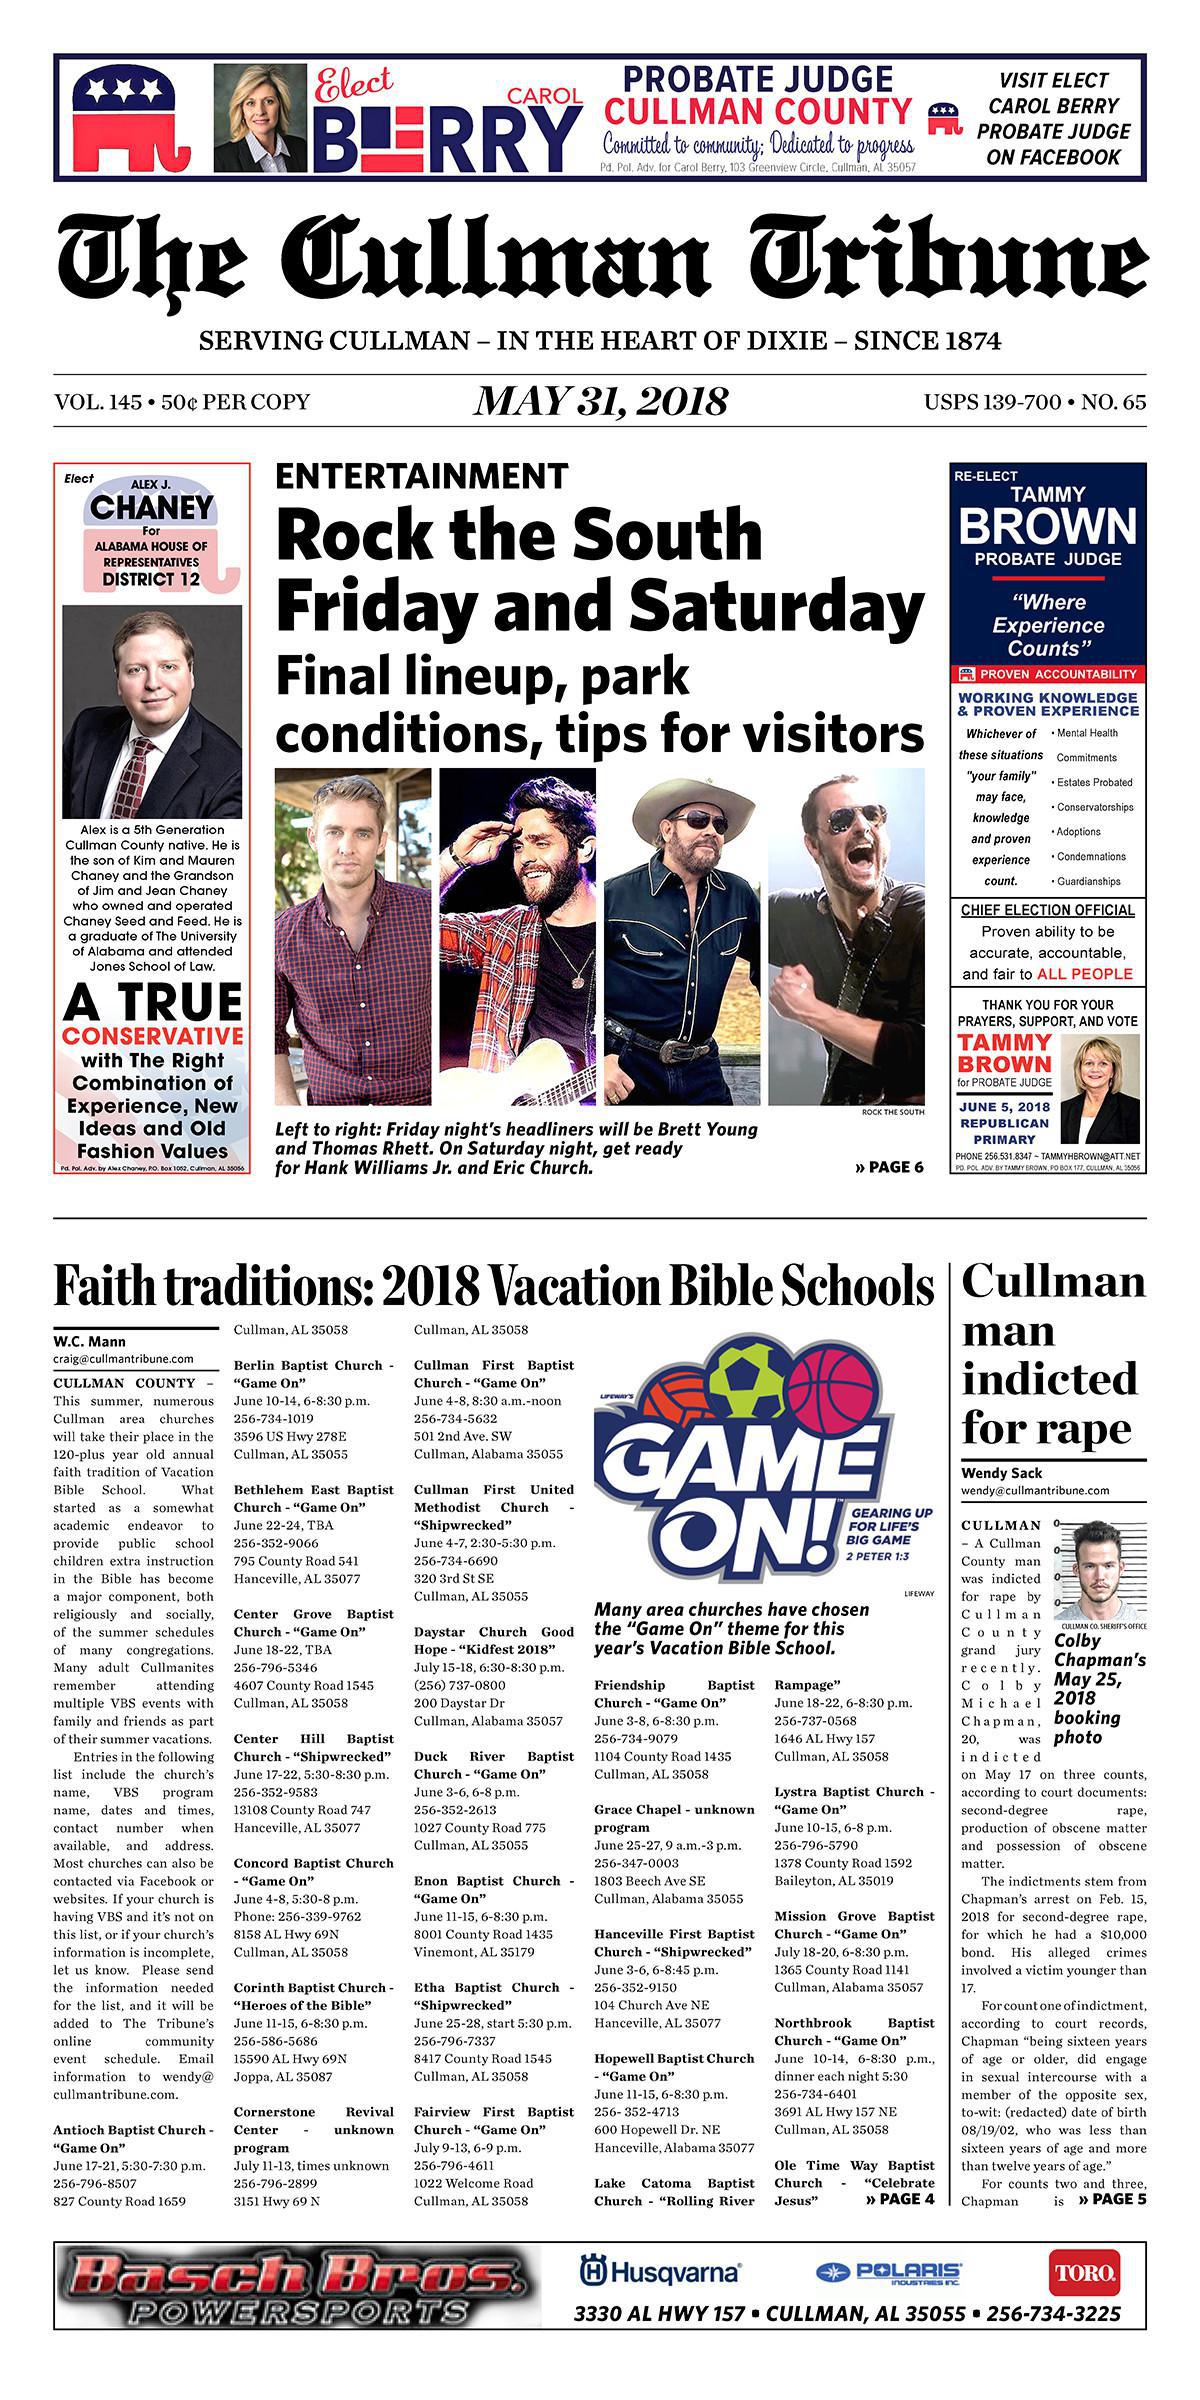 Good Morning Cullman! The 05-31-2018 edition of the Cullman Tribune is now ready to view